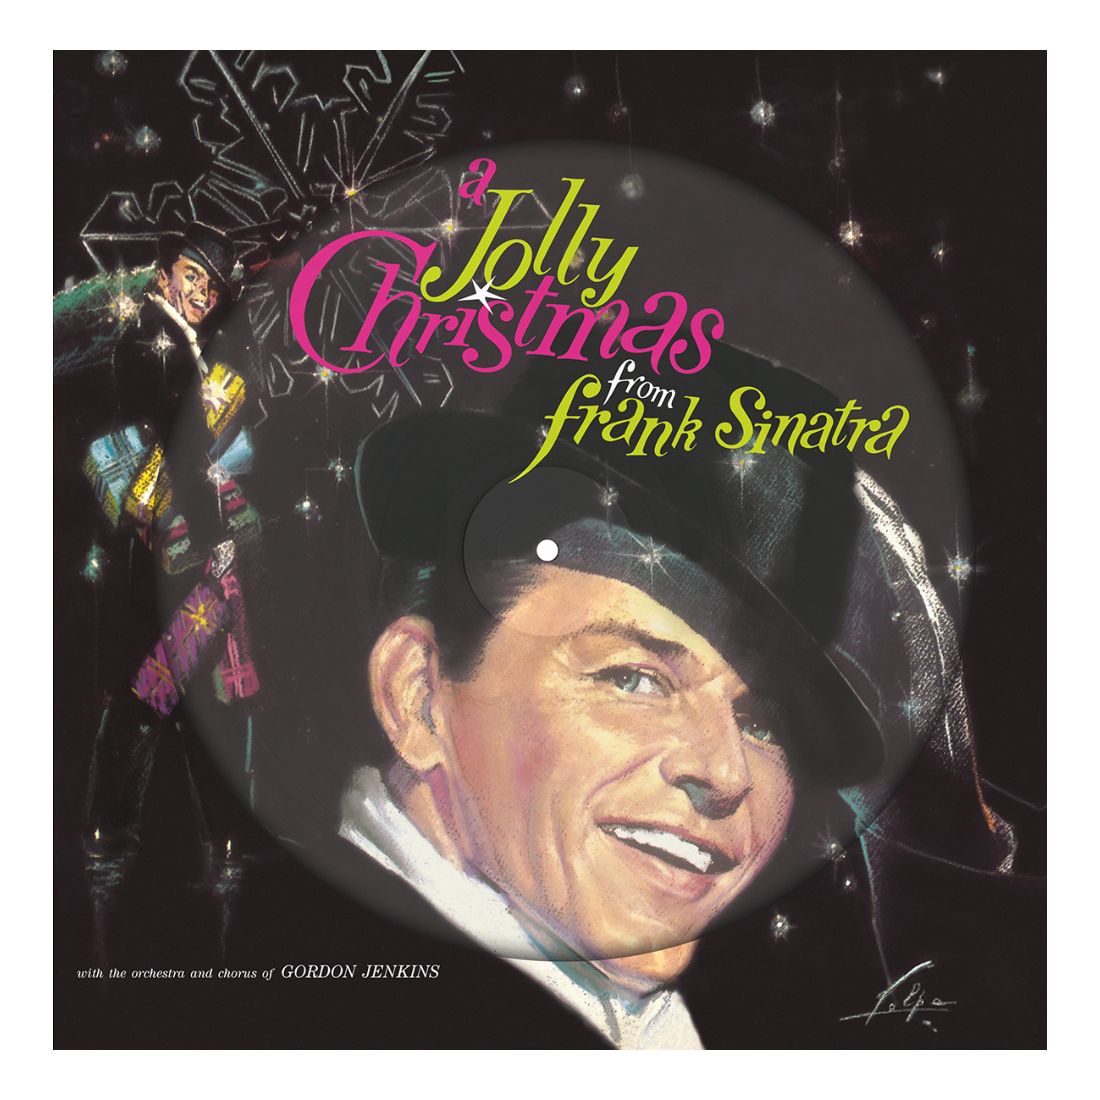 Виниловая пластинка A Jolly Christmas from Frank Sinatra (Picture Disc) | Frank Sinatra frank sinatra frank sinatra a jolly christmas from frank sinatra